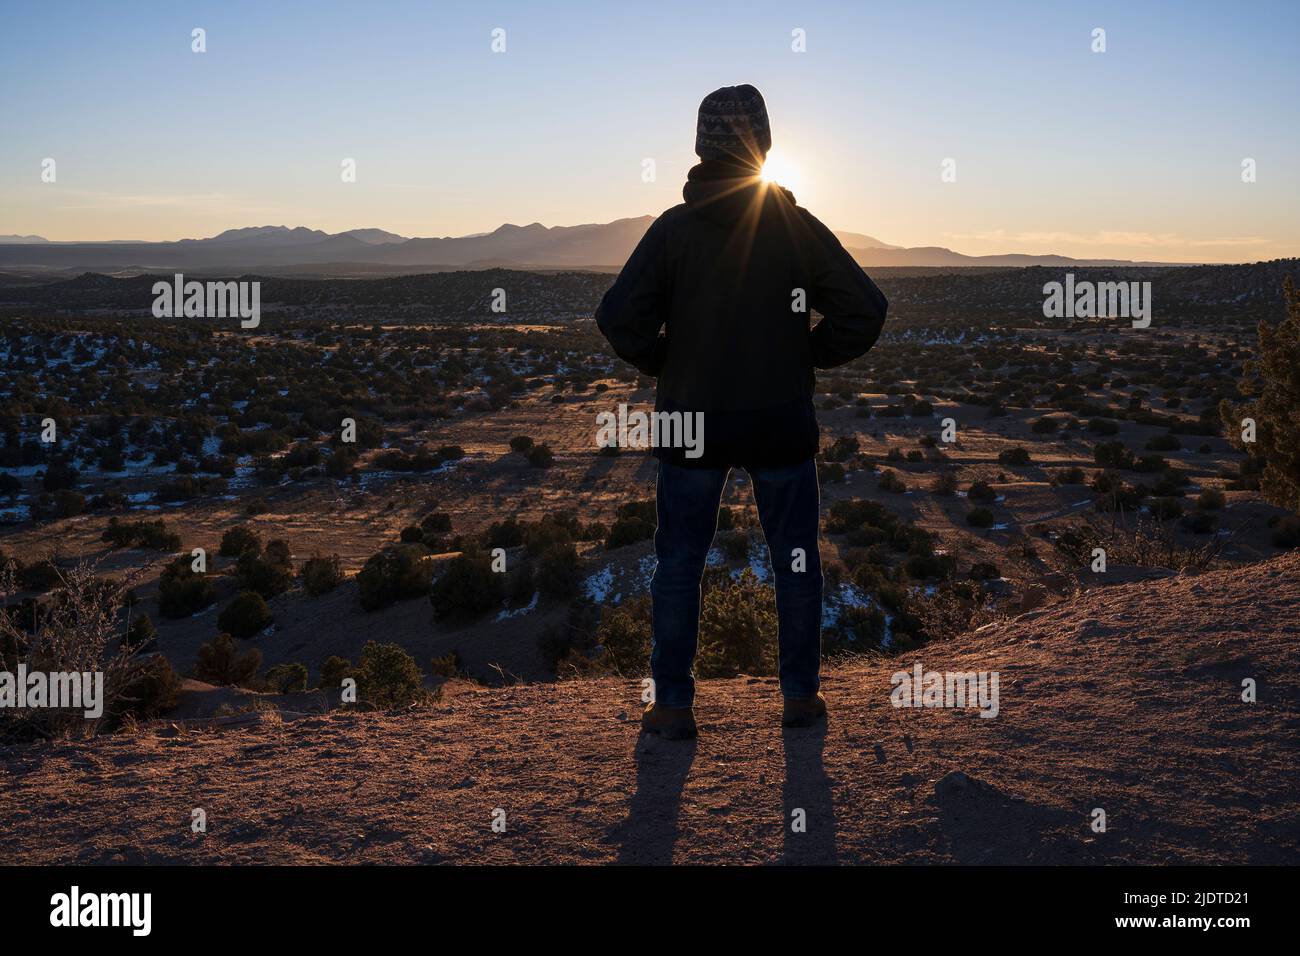 USA, New Mexico, Lamy, Rear view of man in desert landscape at sunset in Galisteo Basin Preserve Stock Photo